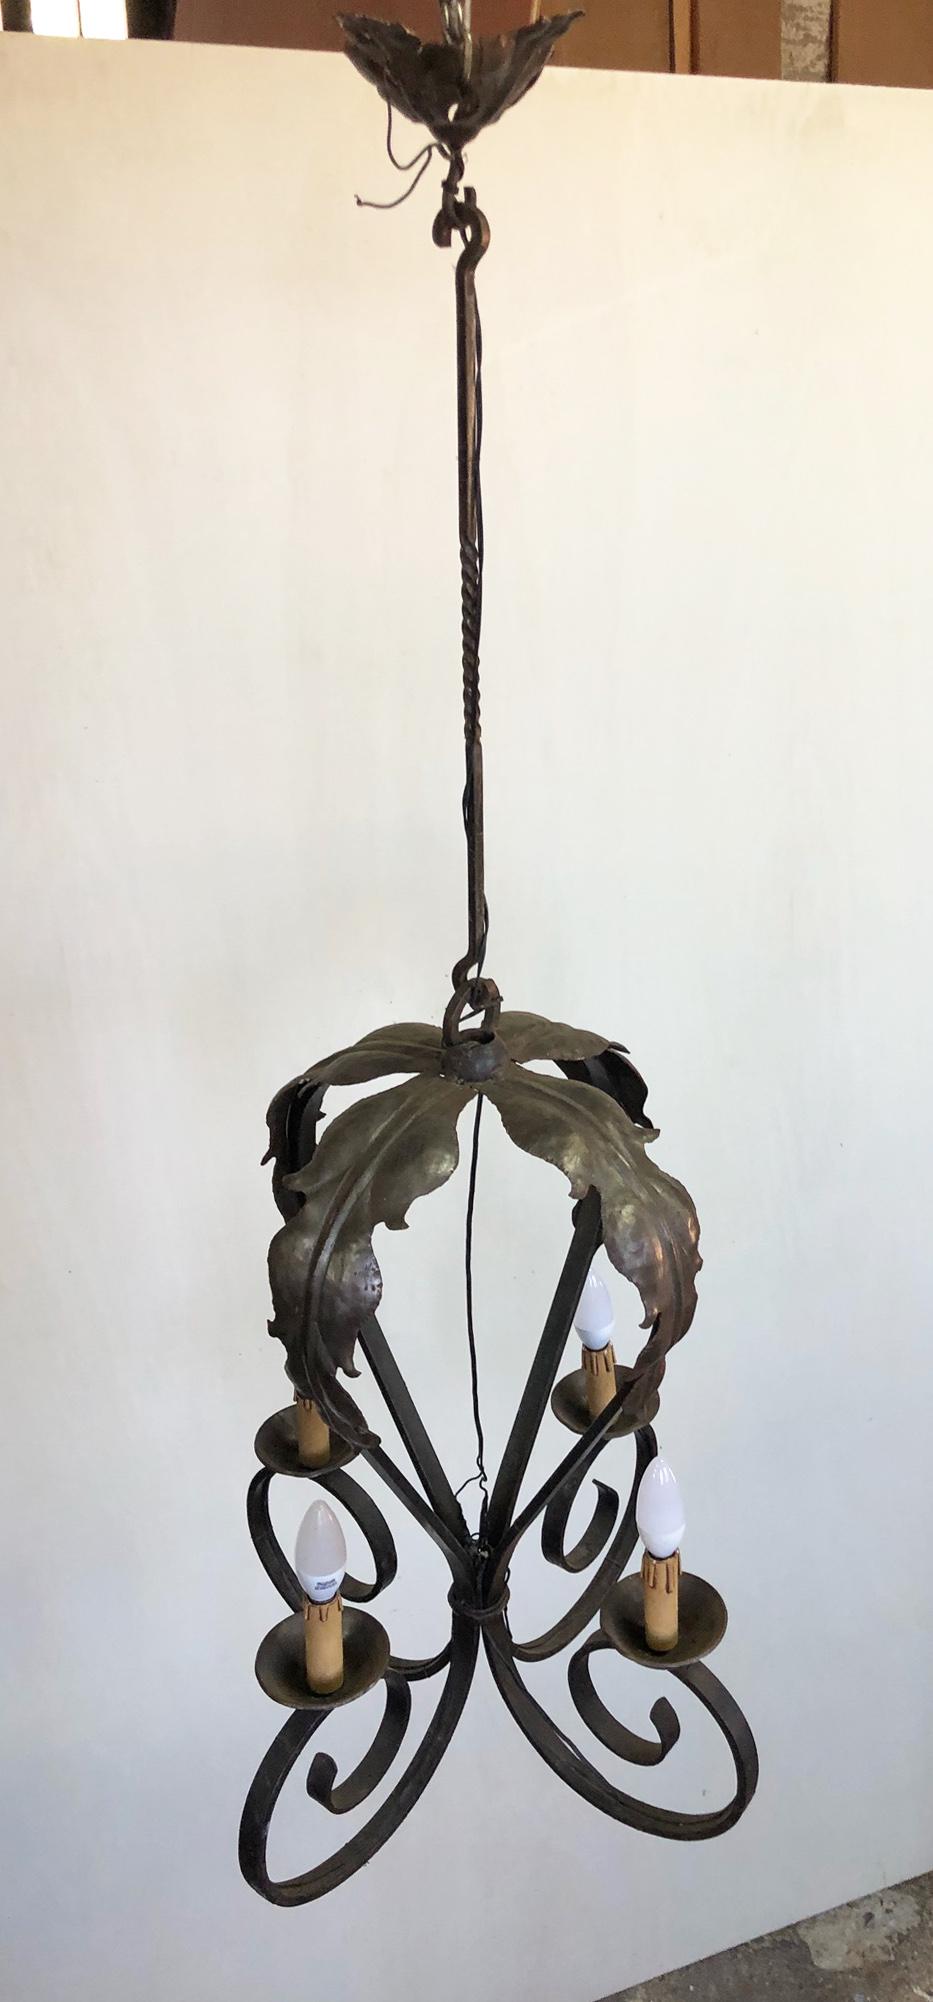 Italian iron chandelier with 4 lights very strong.
Original from 1970. 
Very beautiful special iron patinated.
Comes from an old city villa in the Garfagnana area of Tuscany.
As shown in the photographs and videos, there are some small imperfect